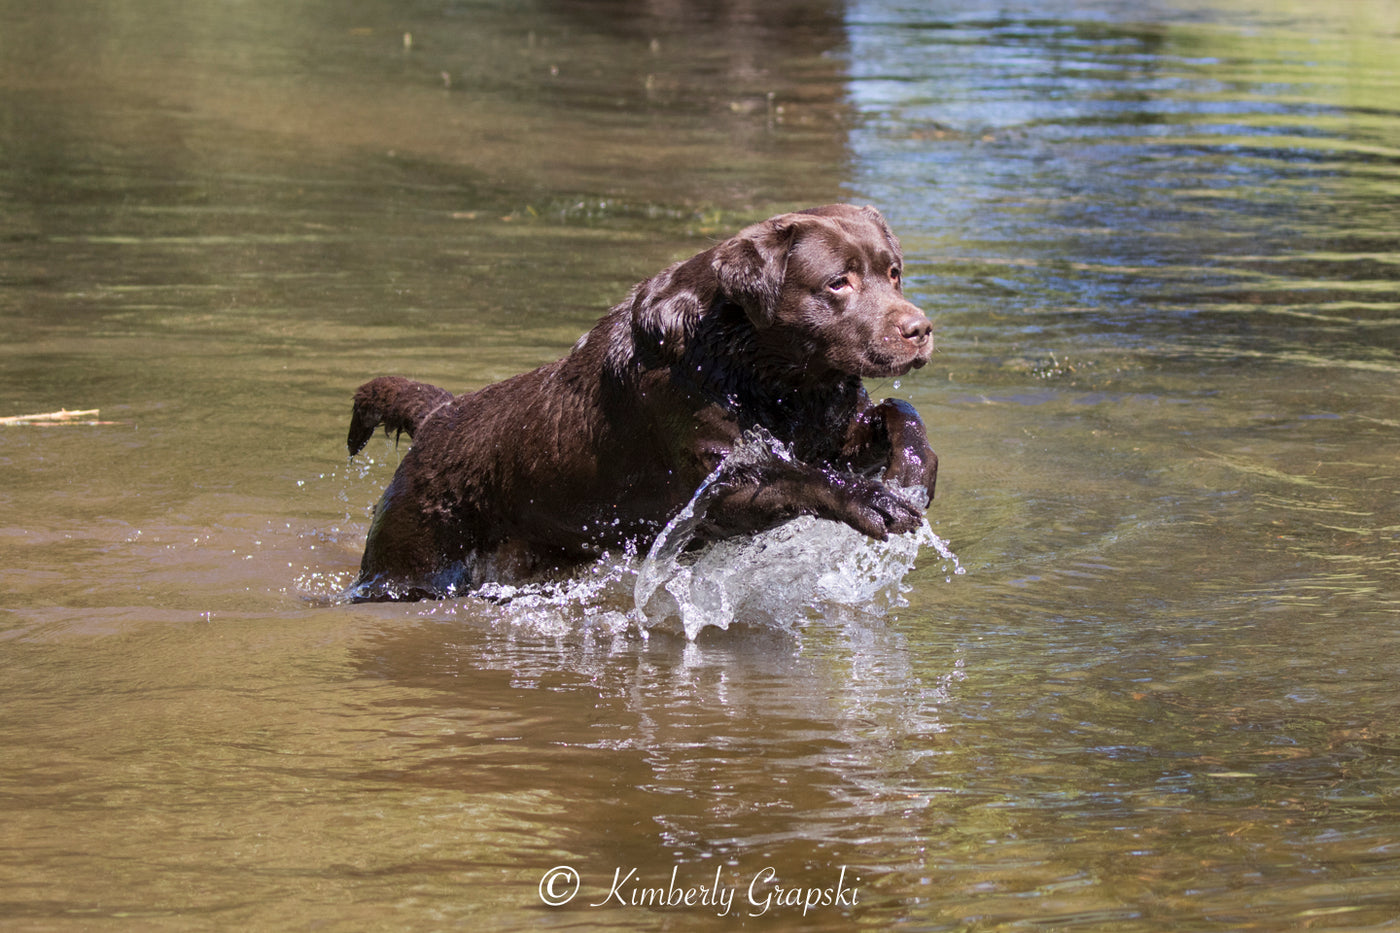 Chocolate lab jumping out of the water